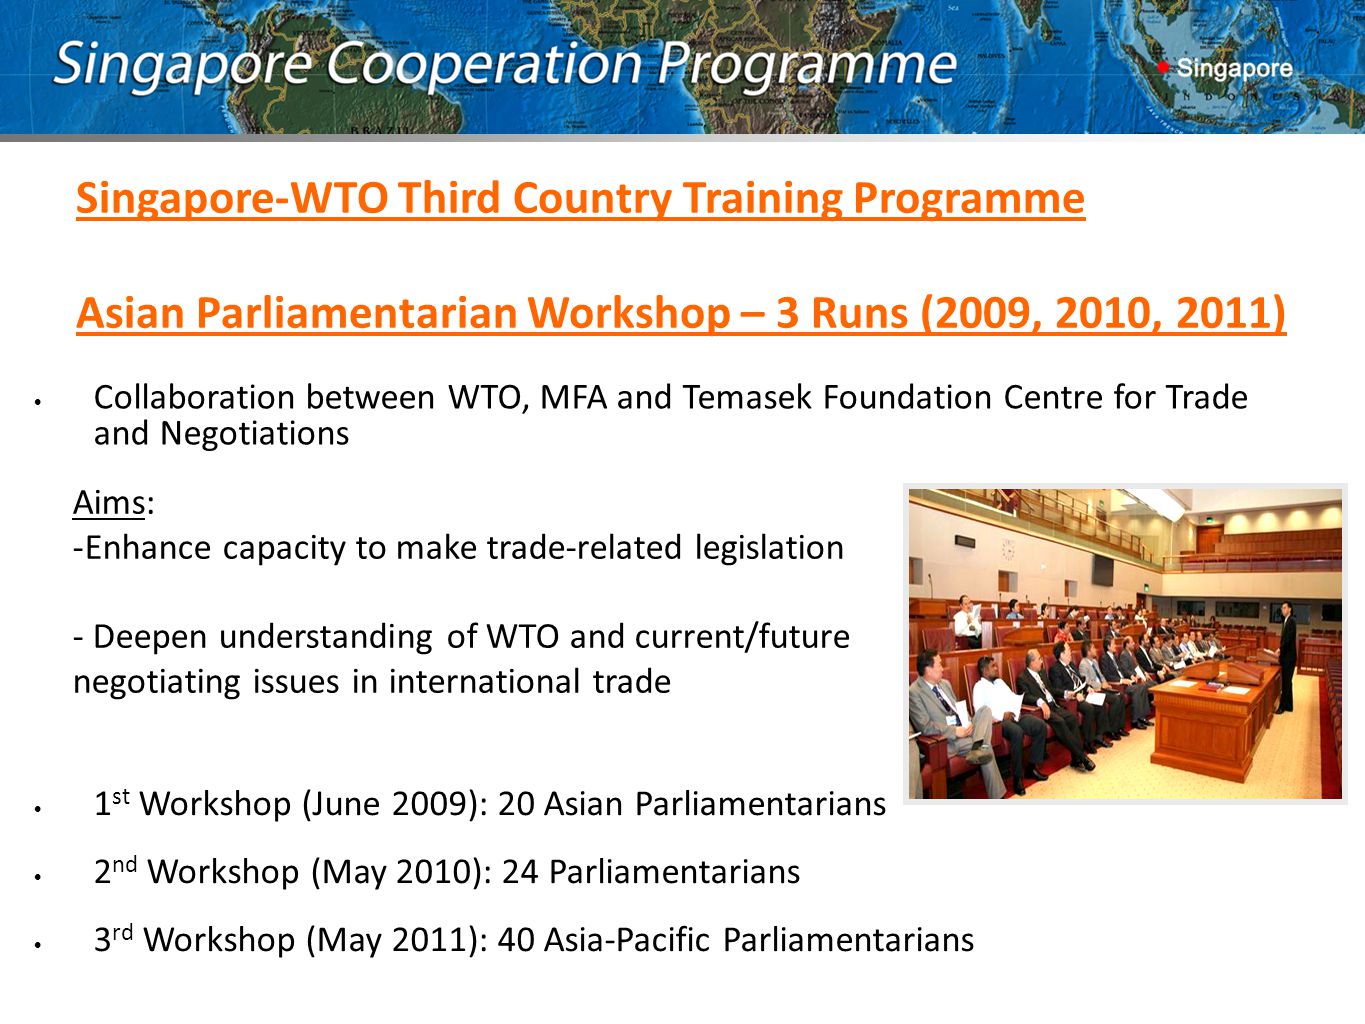 Singapore-WTO Third Country Training Programme Asian Parliamentarian Workshop – 3 Runs (2009, 2010, 2011) Collaboration between WTO, MFA and Temasek Foundation Centre for Trade and Negotiations Aims: -Enhance capacity to make trade-related legislation - Deepen understanding of WTO and current/future negotiating issues in international trade 1 st Workshop (June 2009): 20 Asian Parliamentarians 2 nd Workshop (May 2010): 24 Parliamentarians 3 rd Workshop (May 2011): 40 Asia-Pacific Parliamentarians